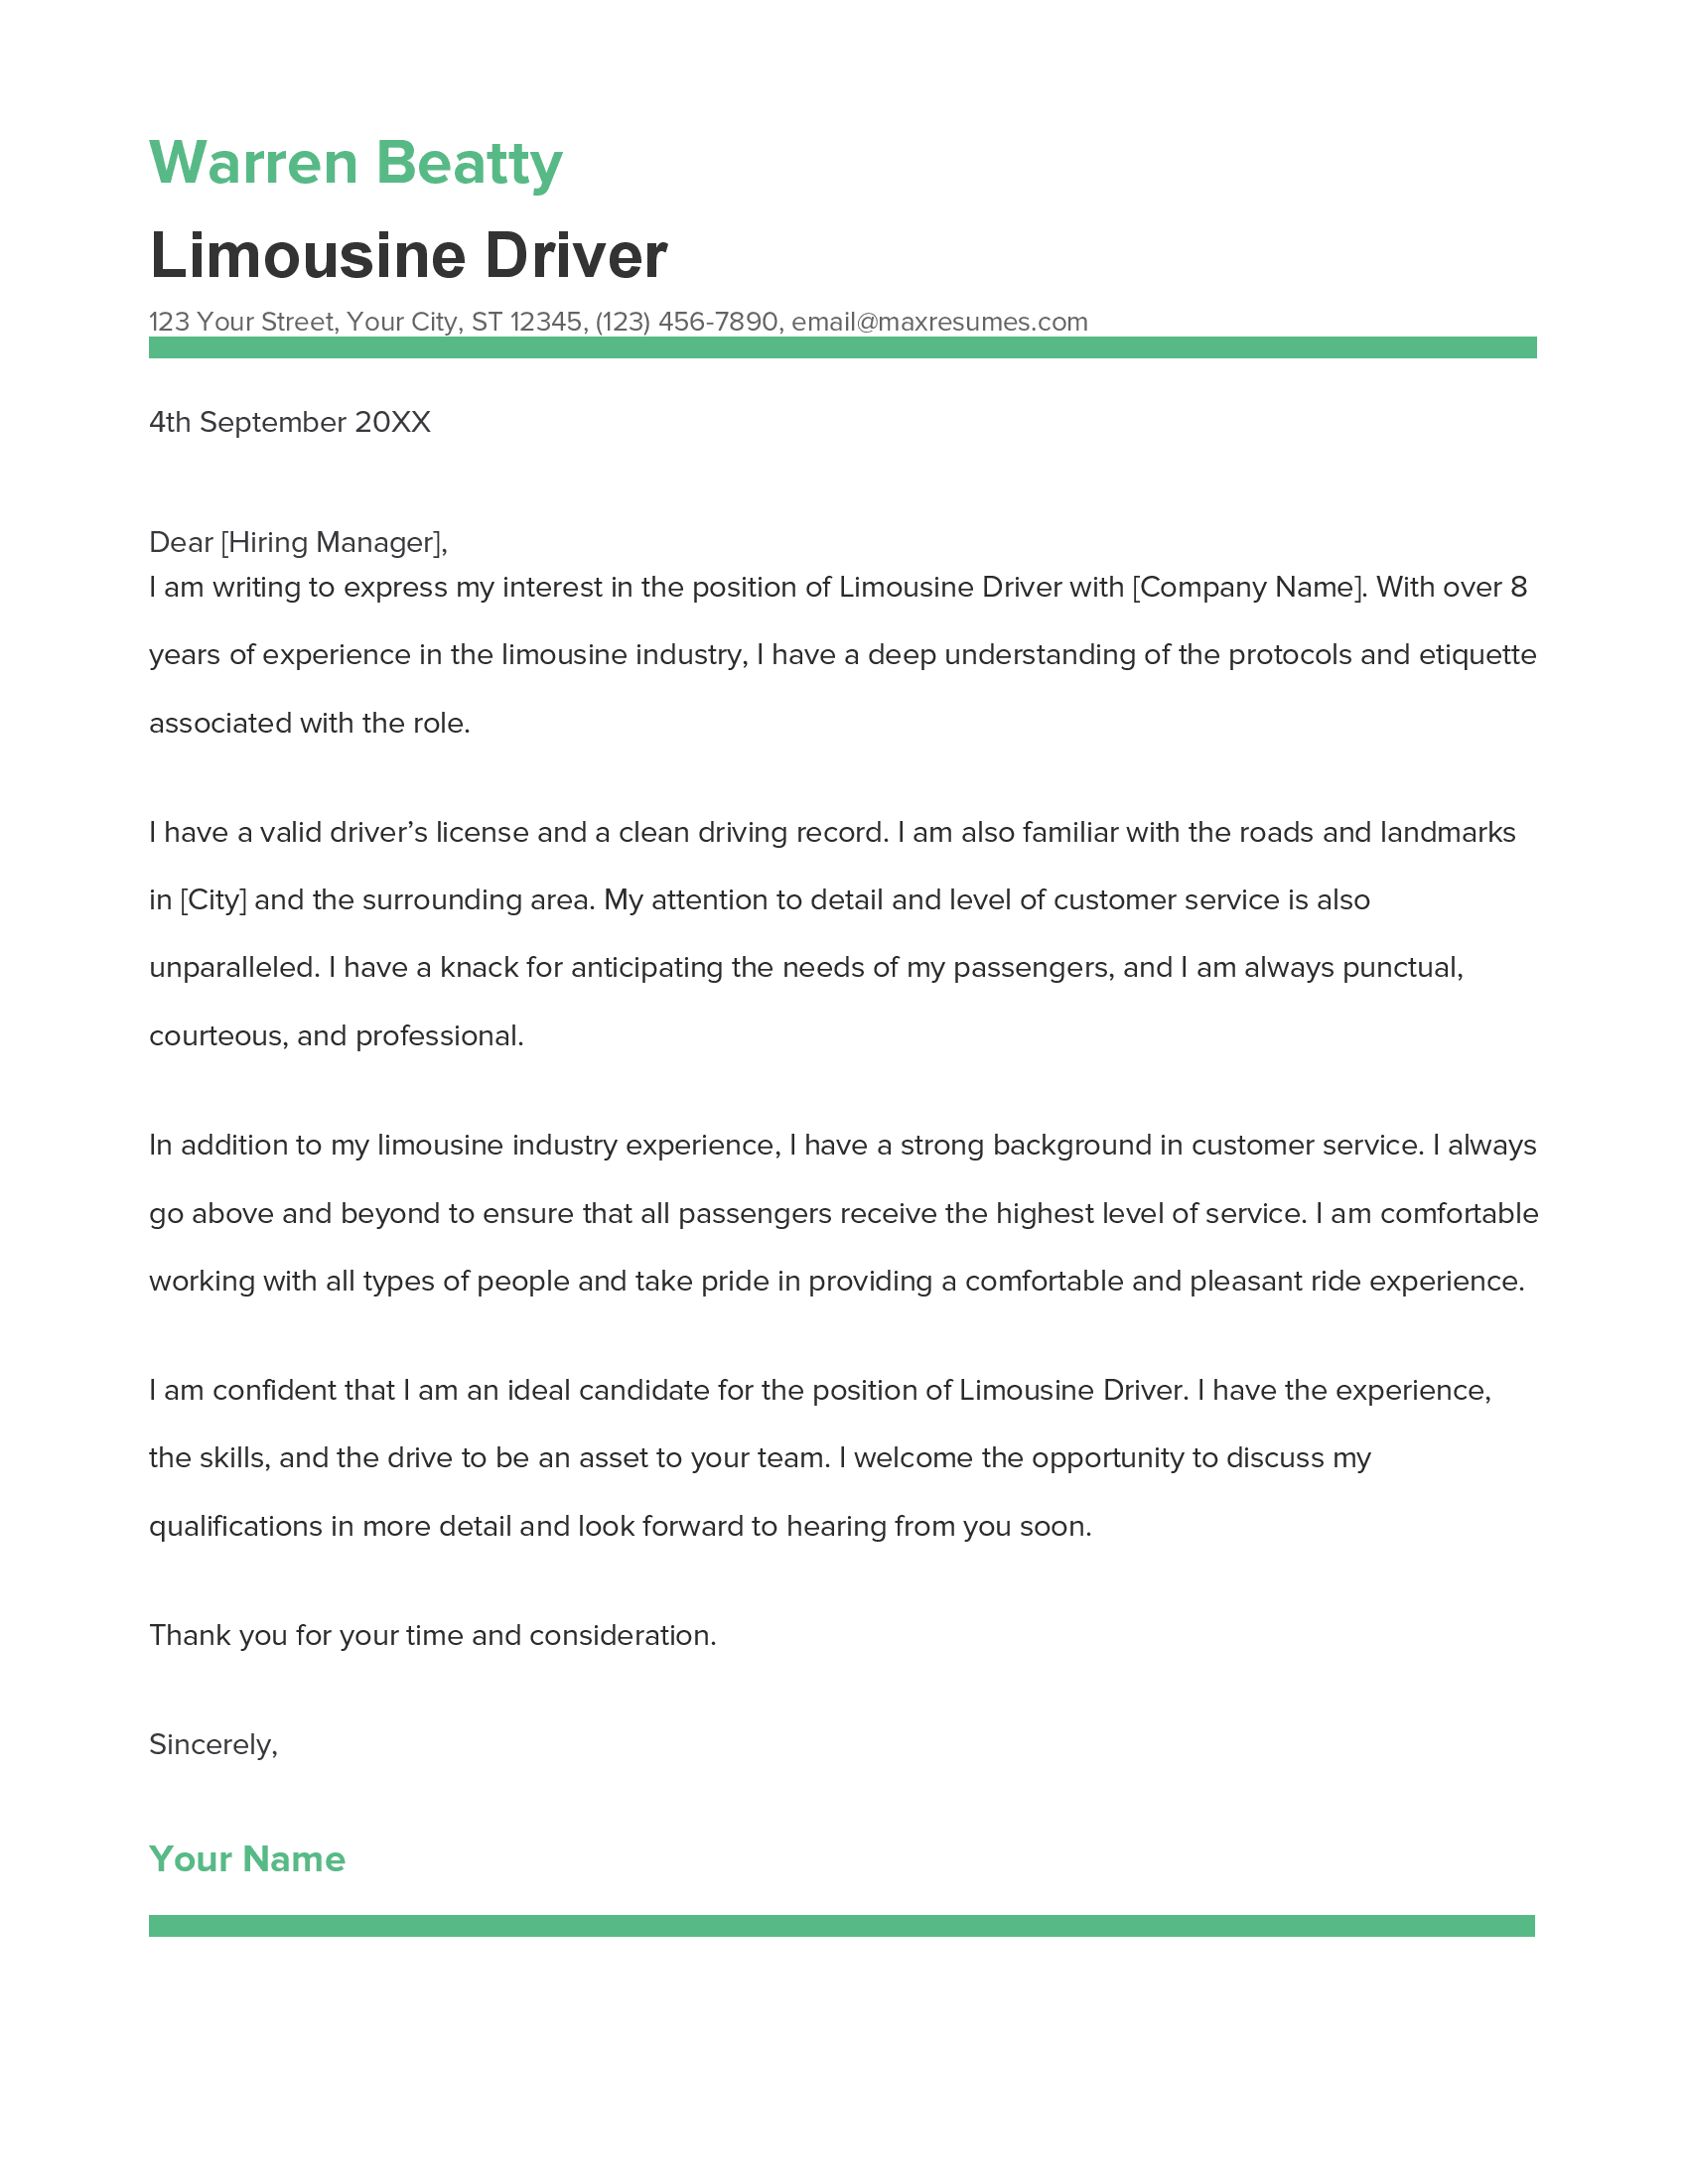 Limousine Driver Cover Letter Example